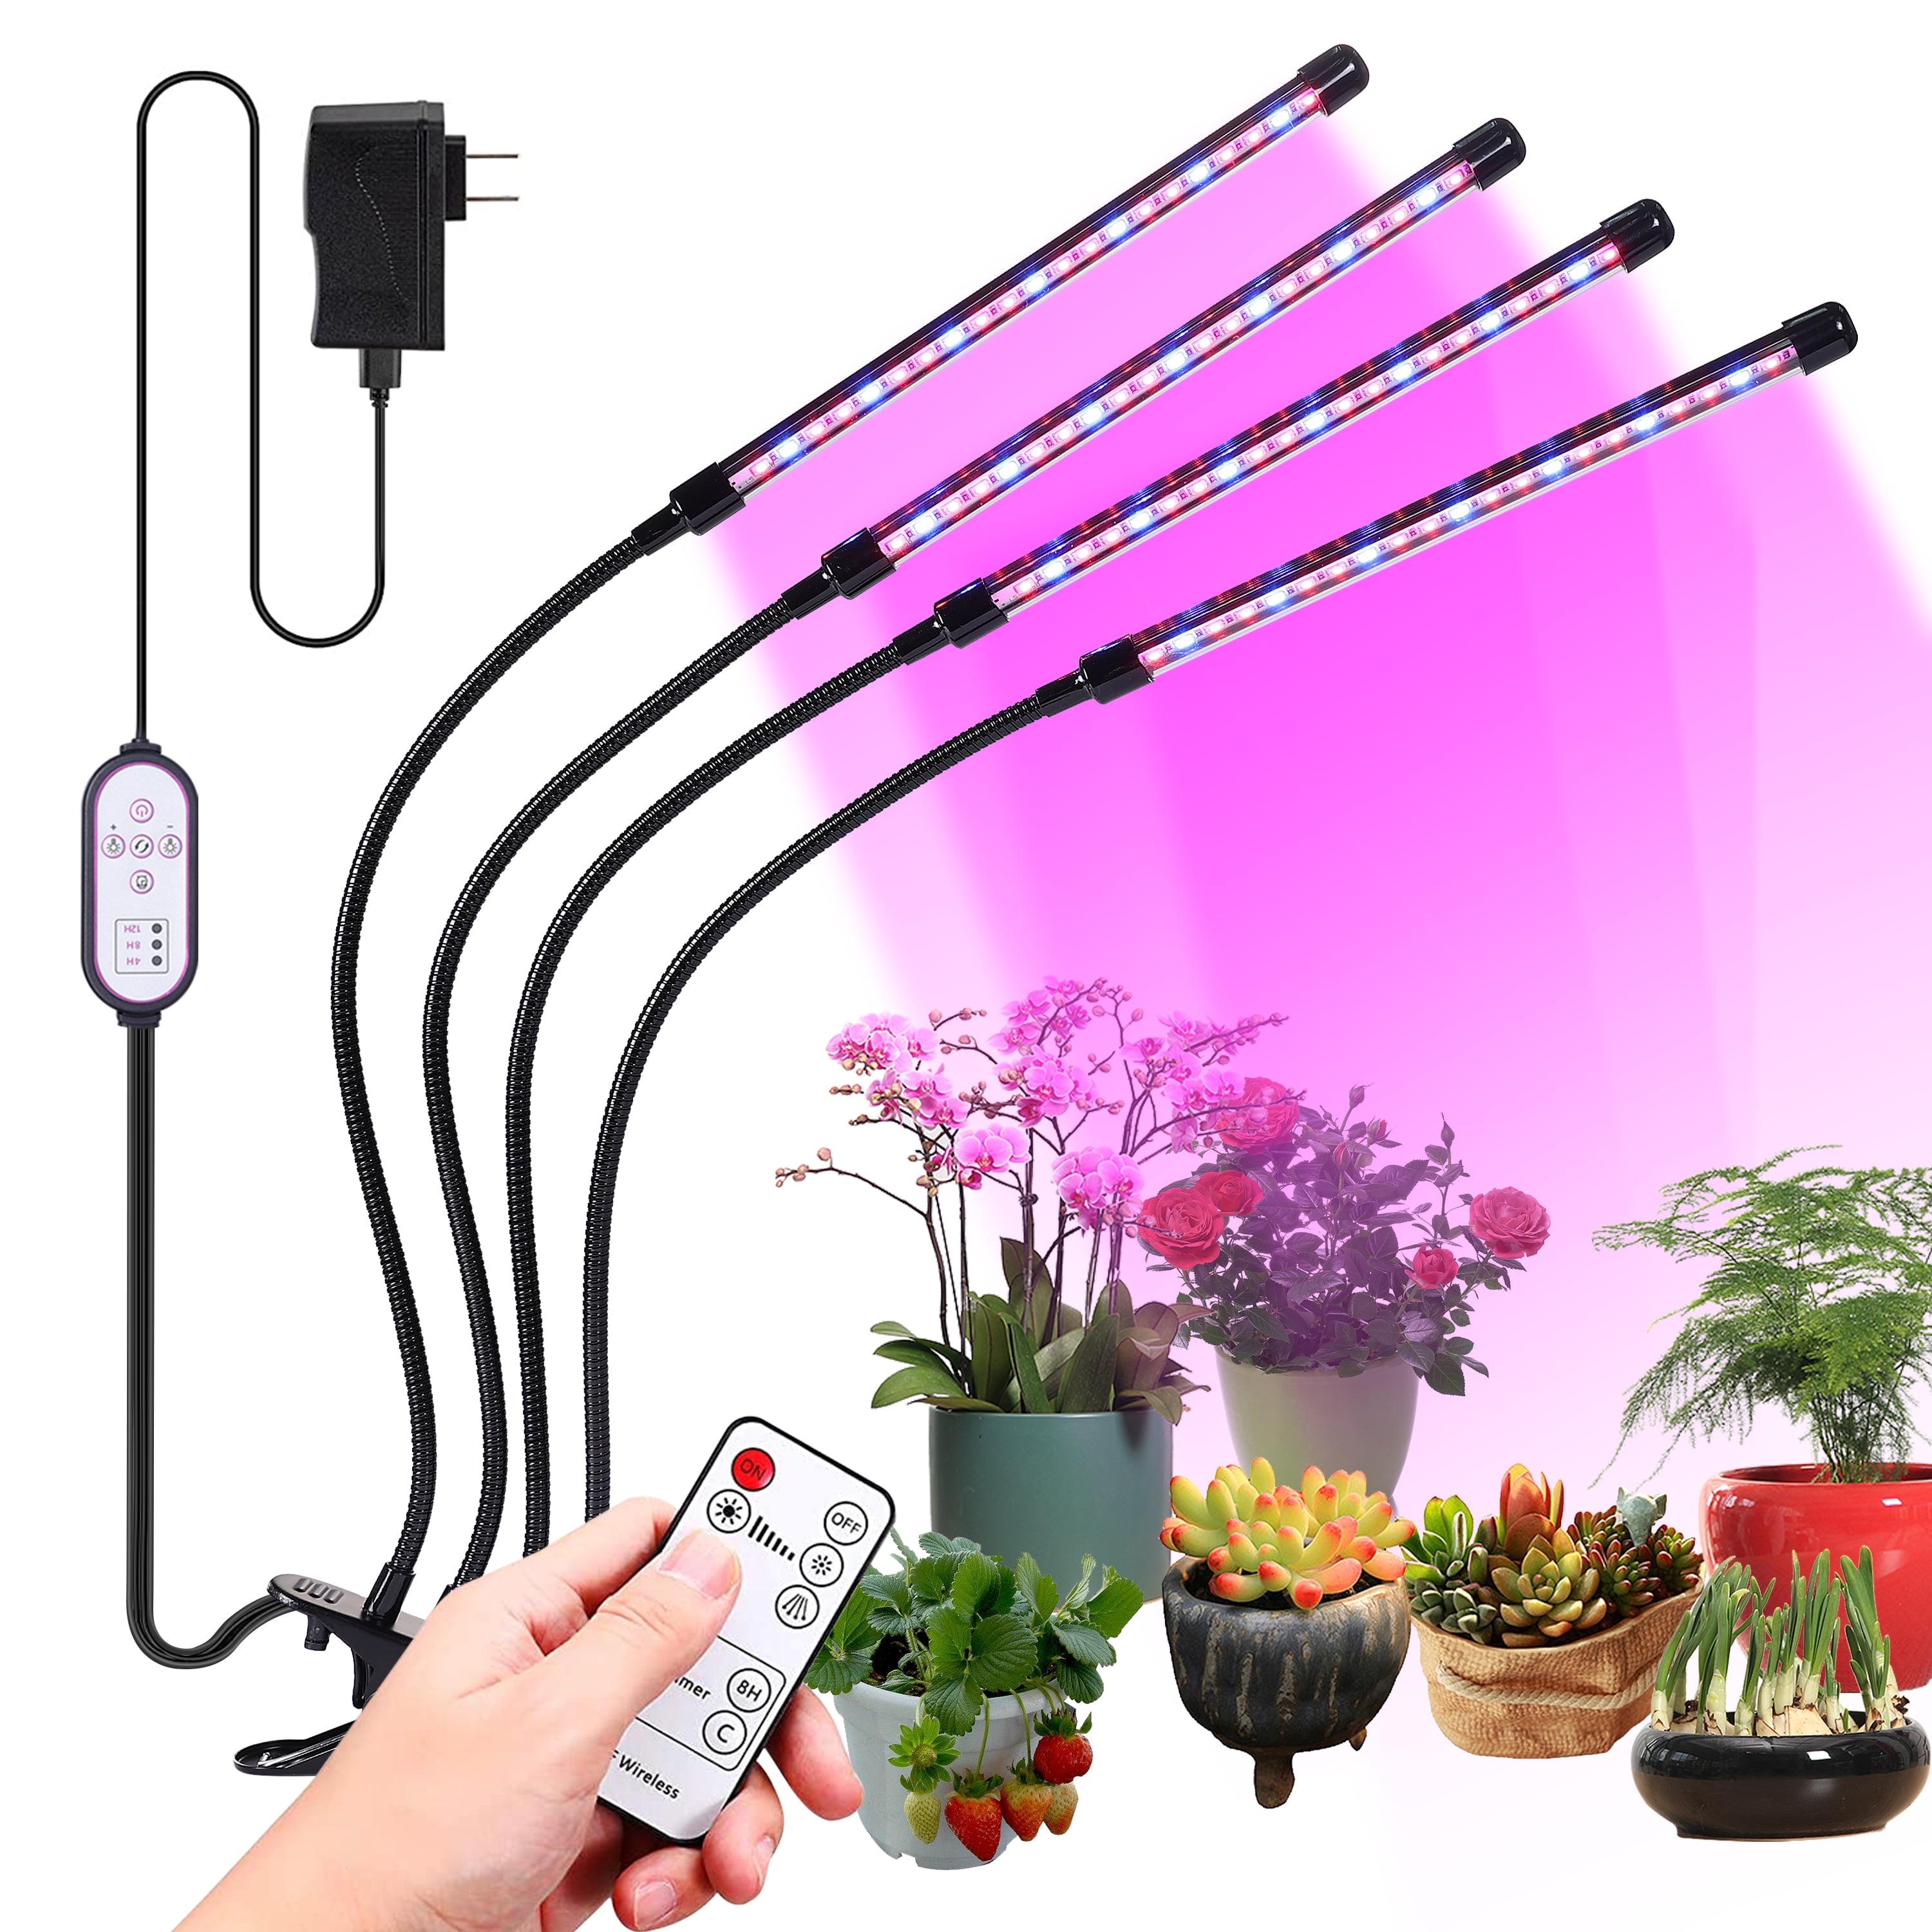 Details about   1-6Pack 80 LED Grow Light Bulb Indoor Plants Growing Full Spectrum Flower Lamp 